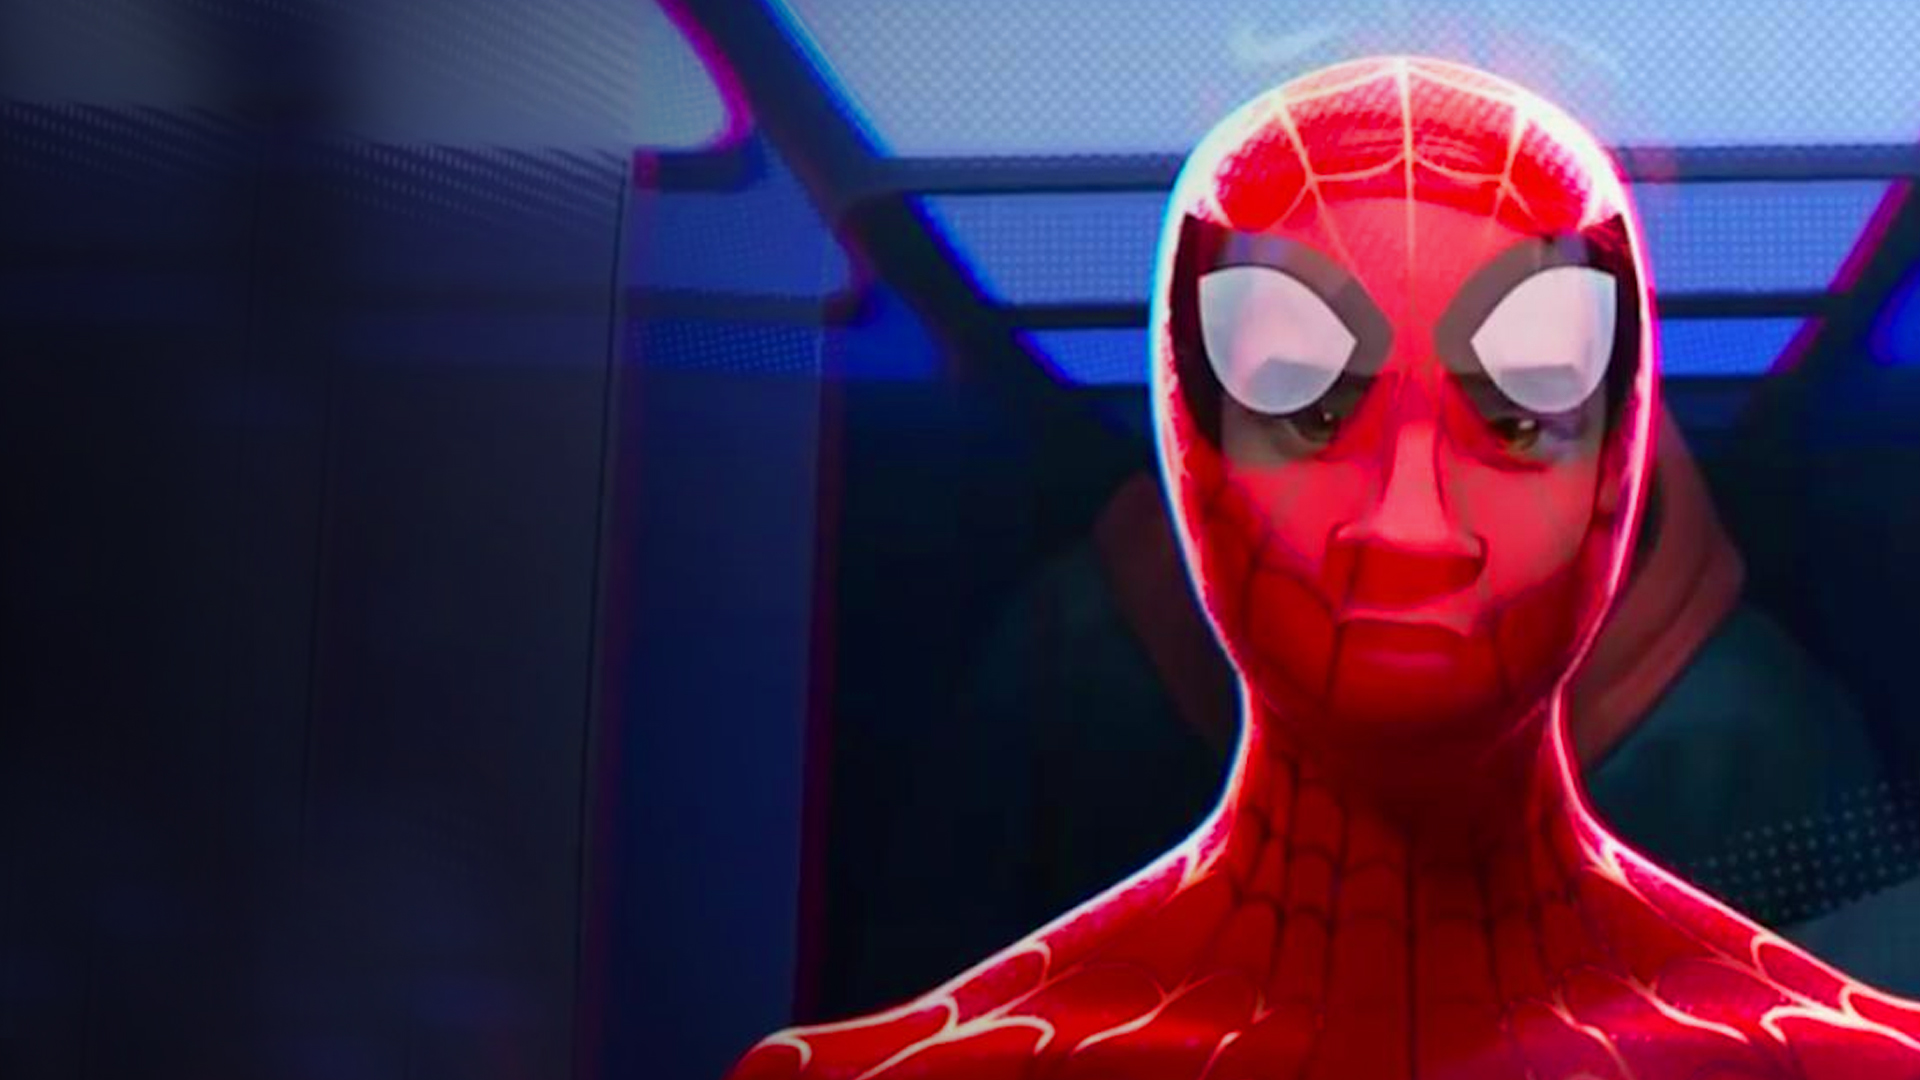 spider man into the spider verse ending explained and post credits scene breakdown in my spoiler talk review on the marvel miles morales multi verse film intro